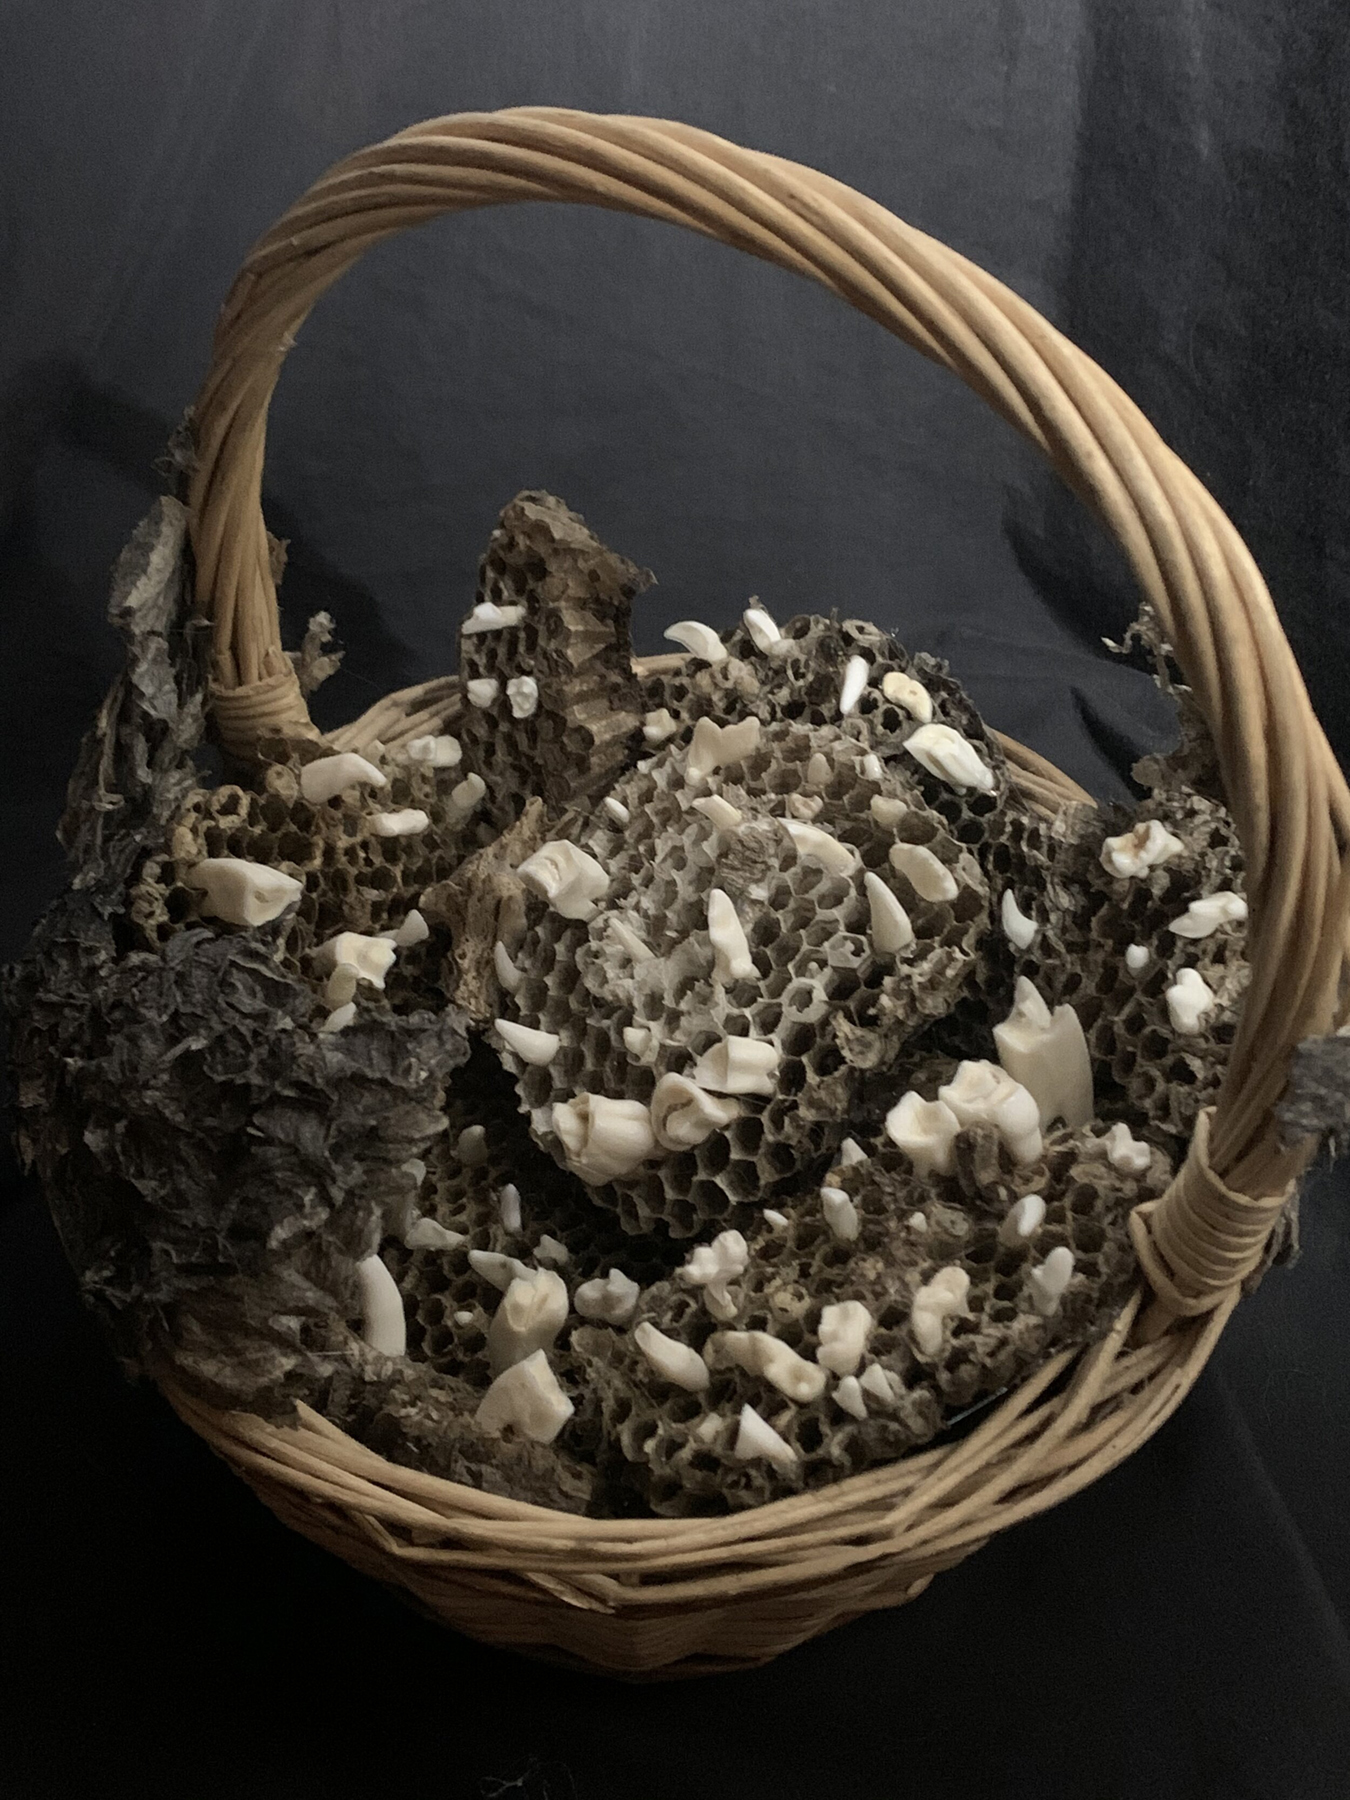 Wicker basket filled with paper wasp nests and assorted animal teeth. Image courtesy of Indi Walter